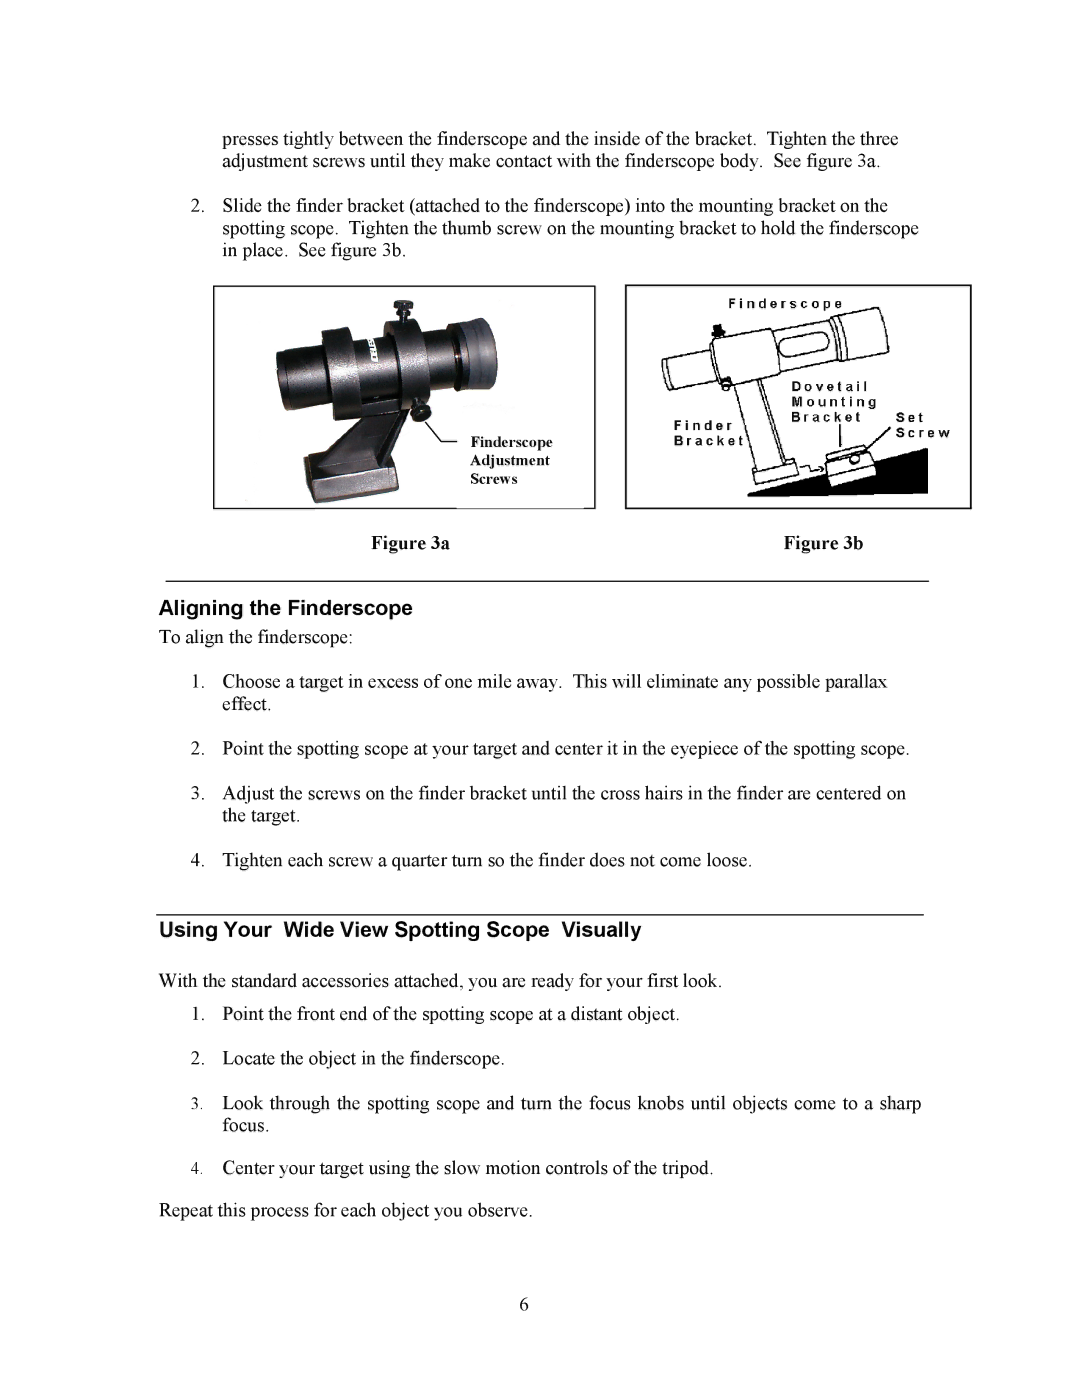 Celestron 52260, 52270 instruction manual Aligning the Finderscope, Using Your Wide View Spotting Scope Visually 